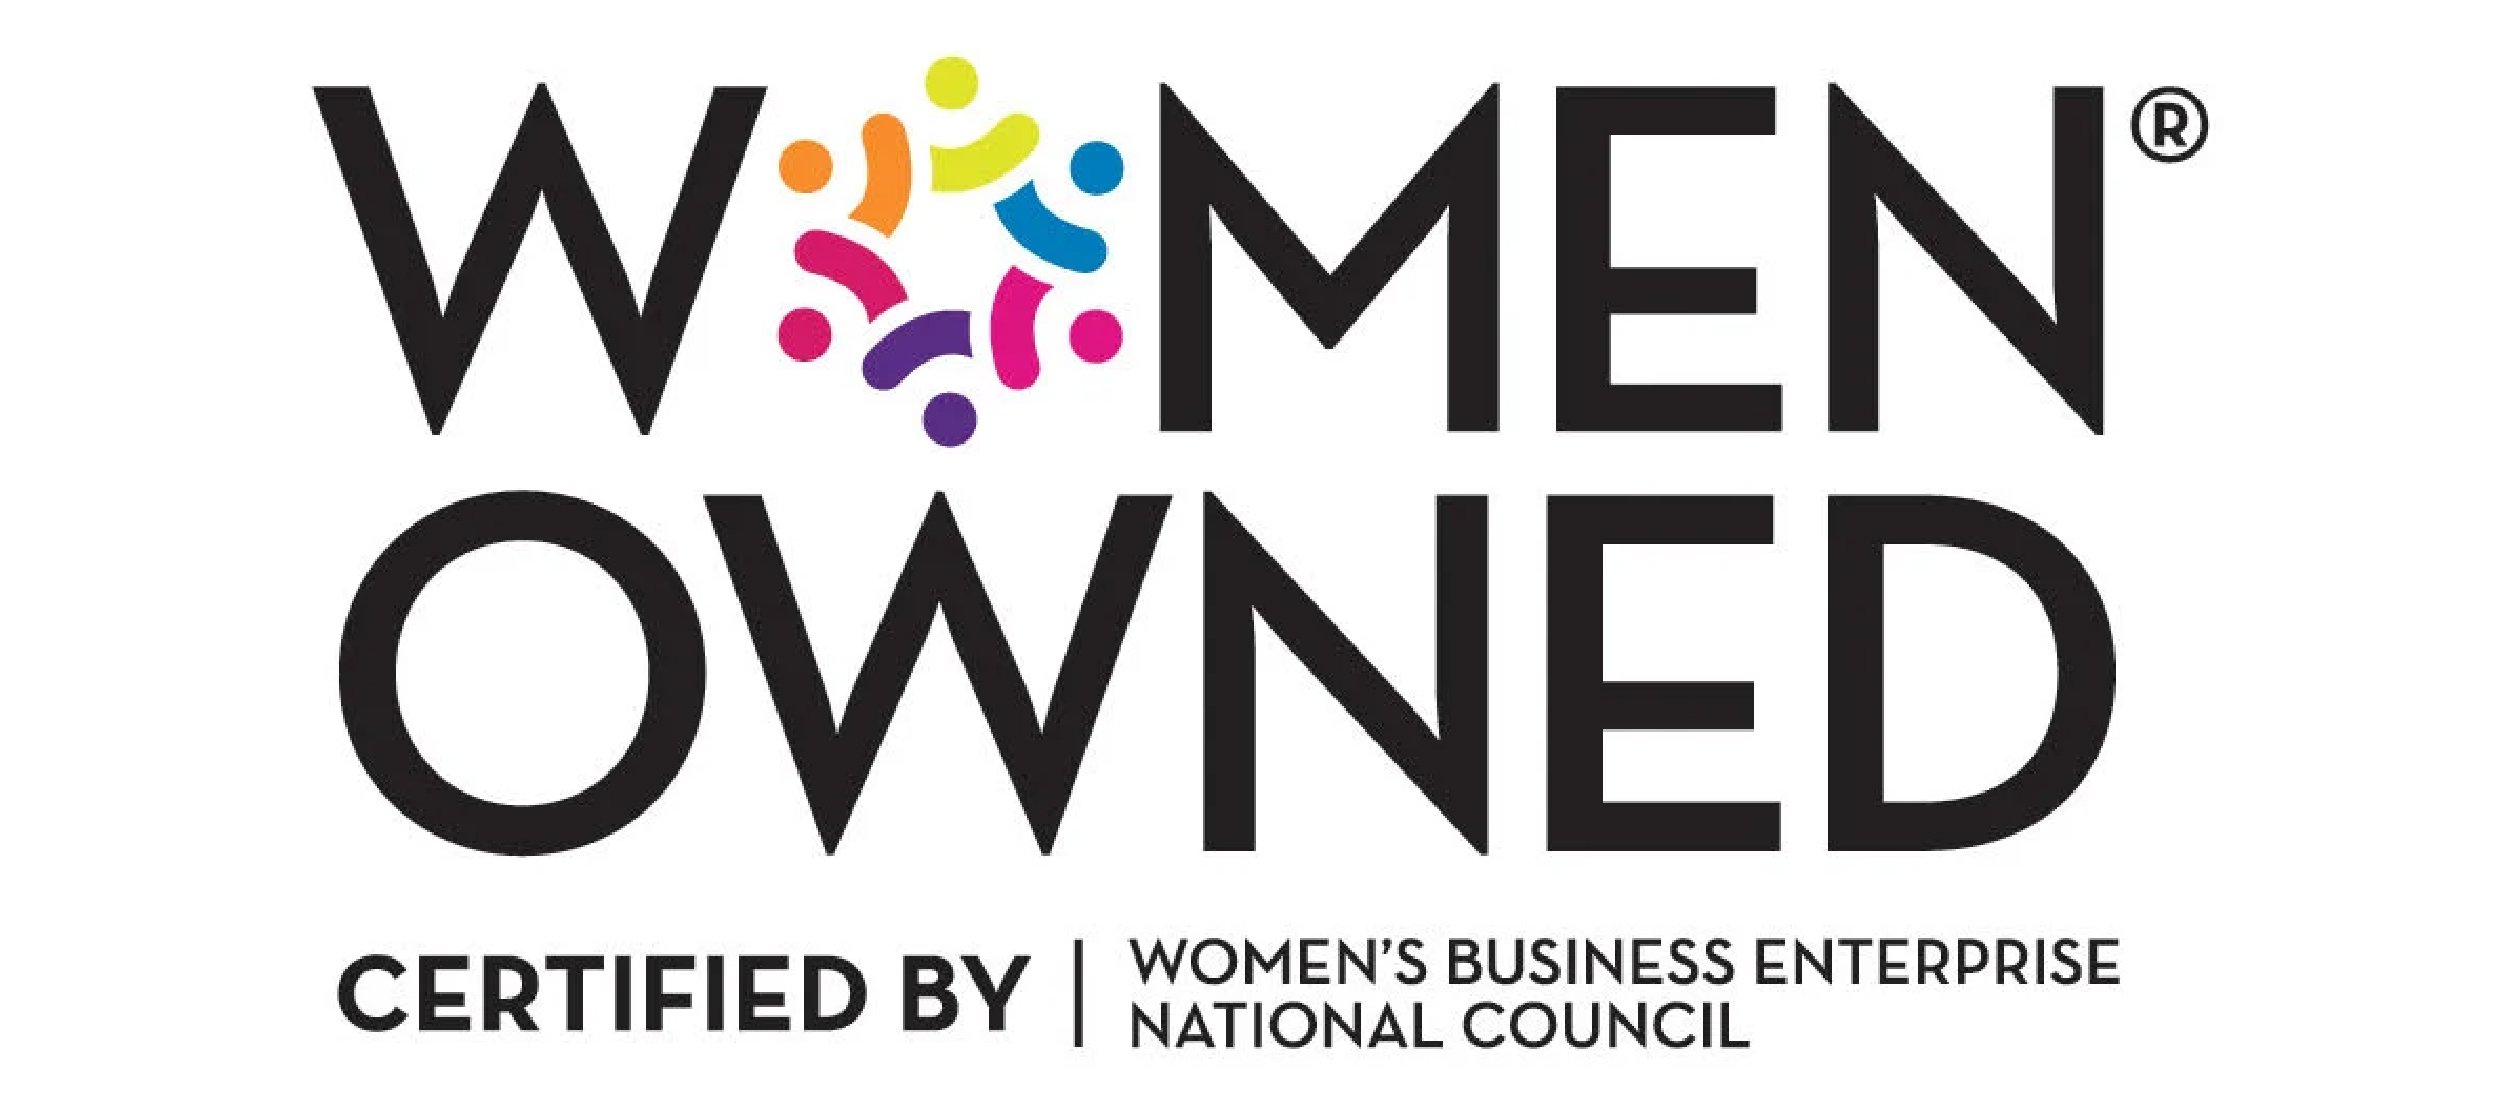 Woman Owned logo